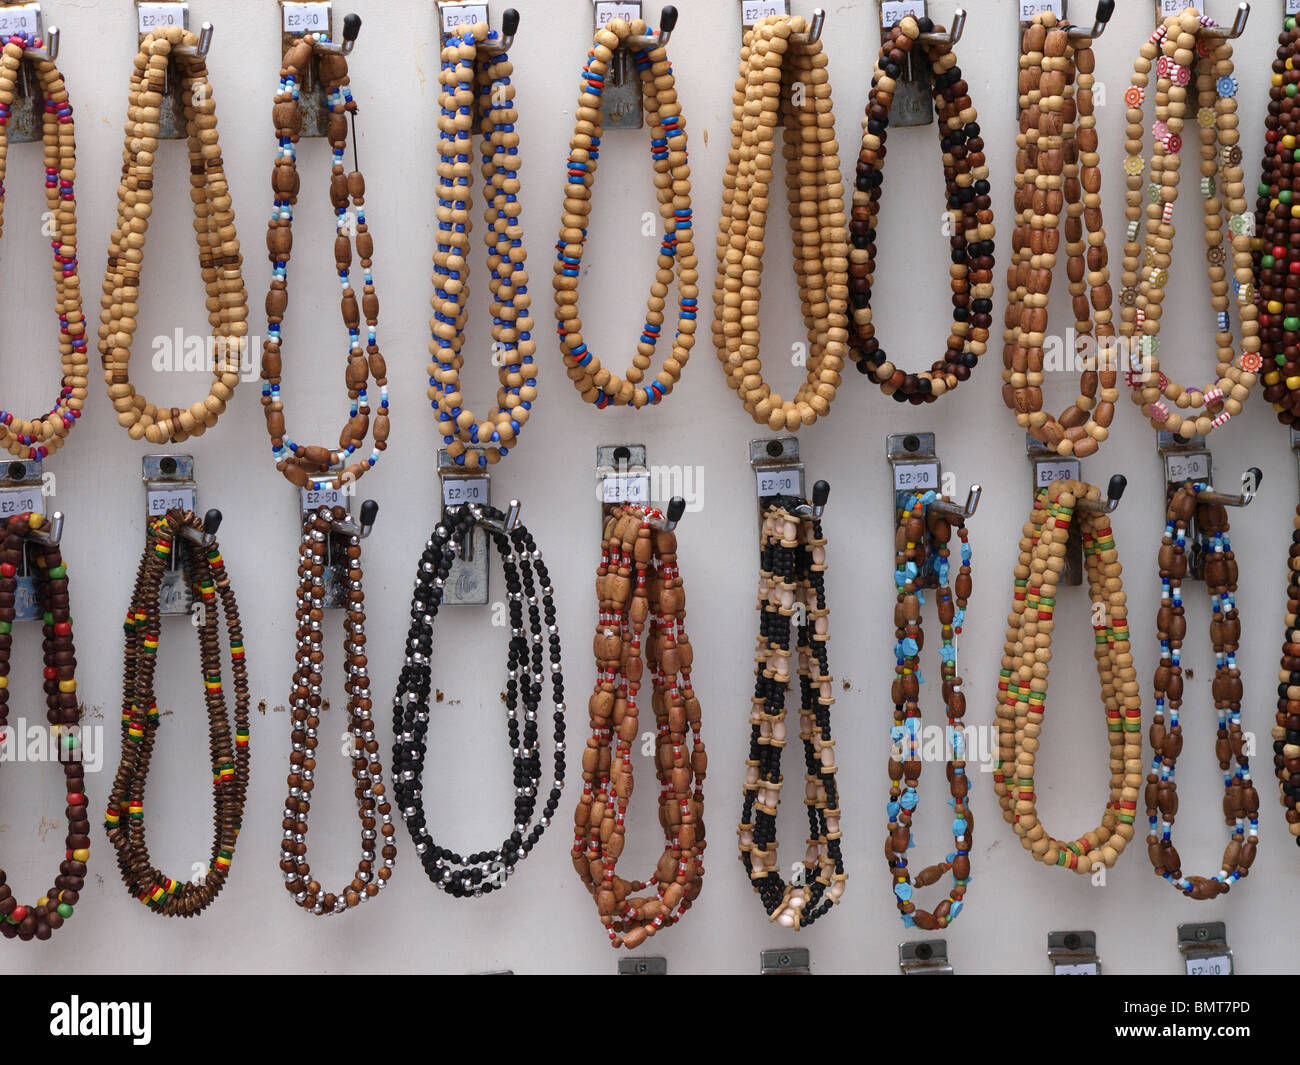 Beaded Necklaces - justdandy